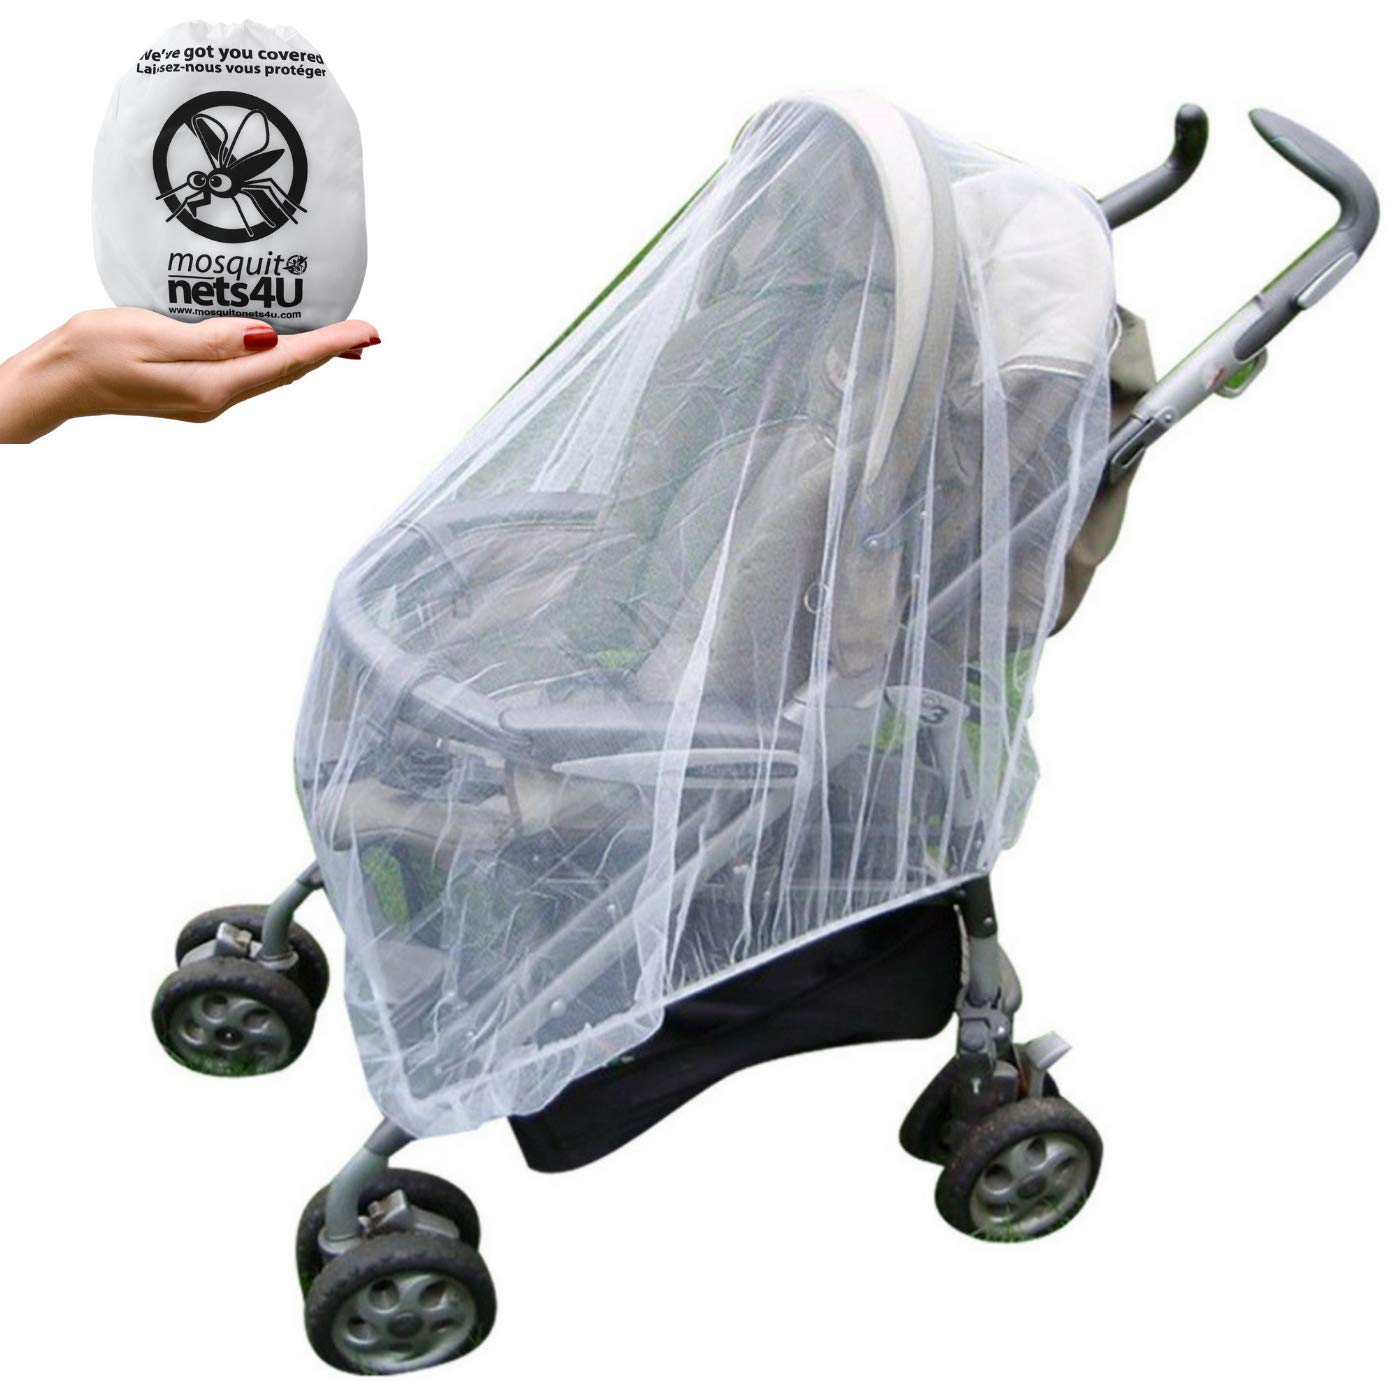 Baby Mosquito Net Infant Insect Net for Prams and Pushchairs Baby Buggies Car Seats Moses Basket Prams and Travel Cots by Mosquito Nets 4 U®